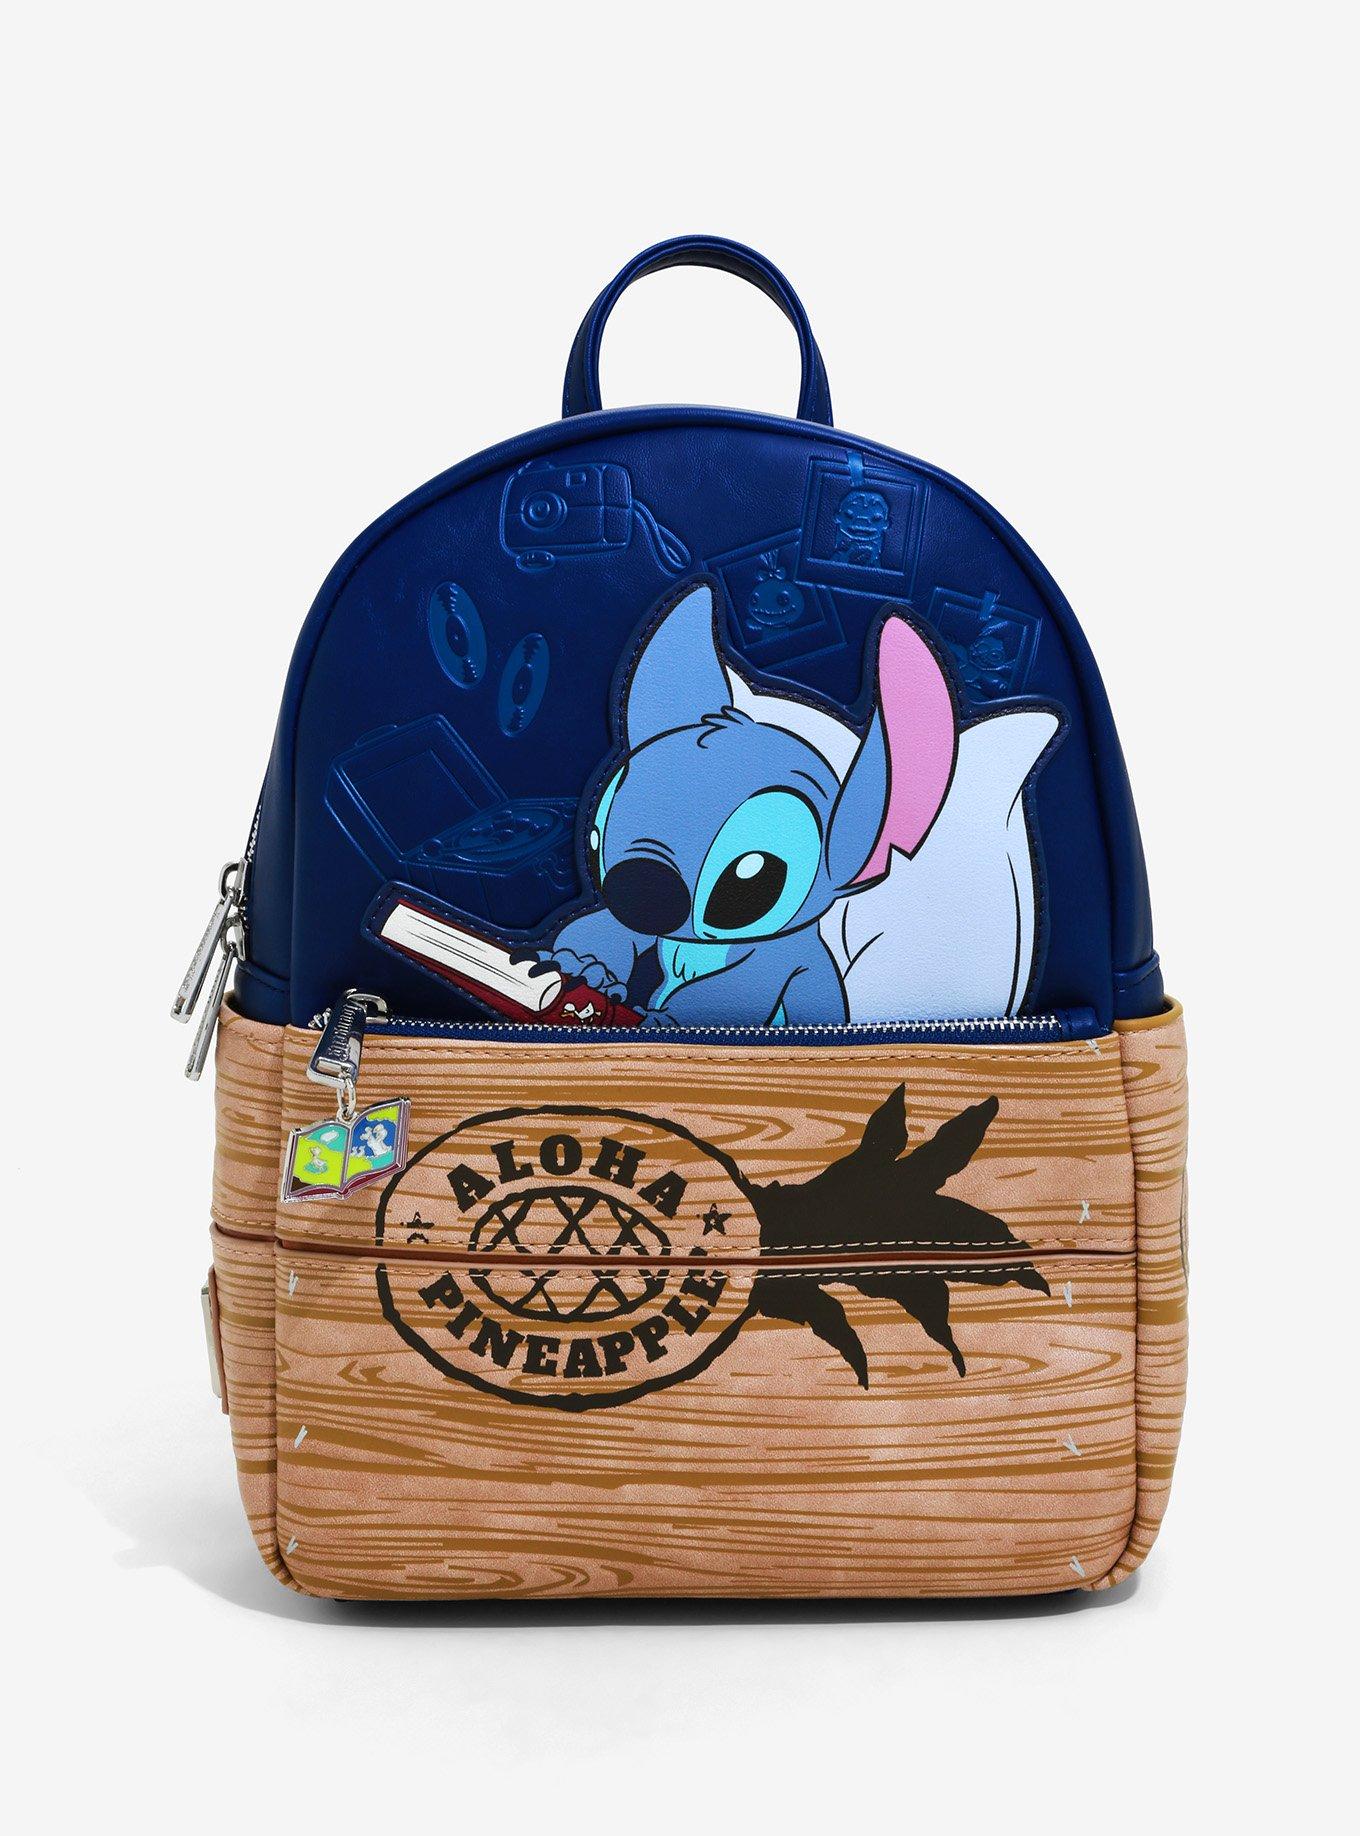 Walt Disney Studio Disney Lilo and Stitch Backpack Lunch Set - Bundle with  Lilo Backpack, Lunch Bag, and Water Bottle Plus Stickers and More (Lilo and